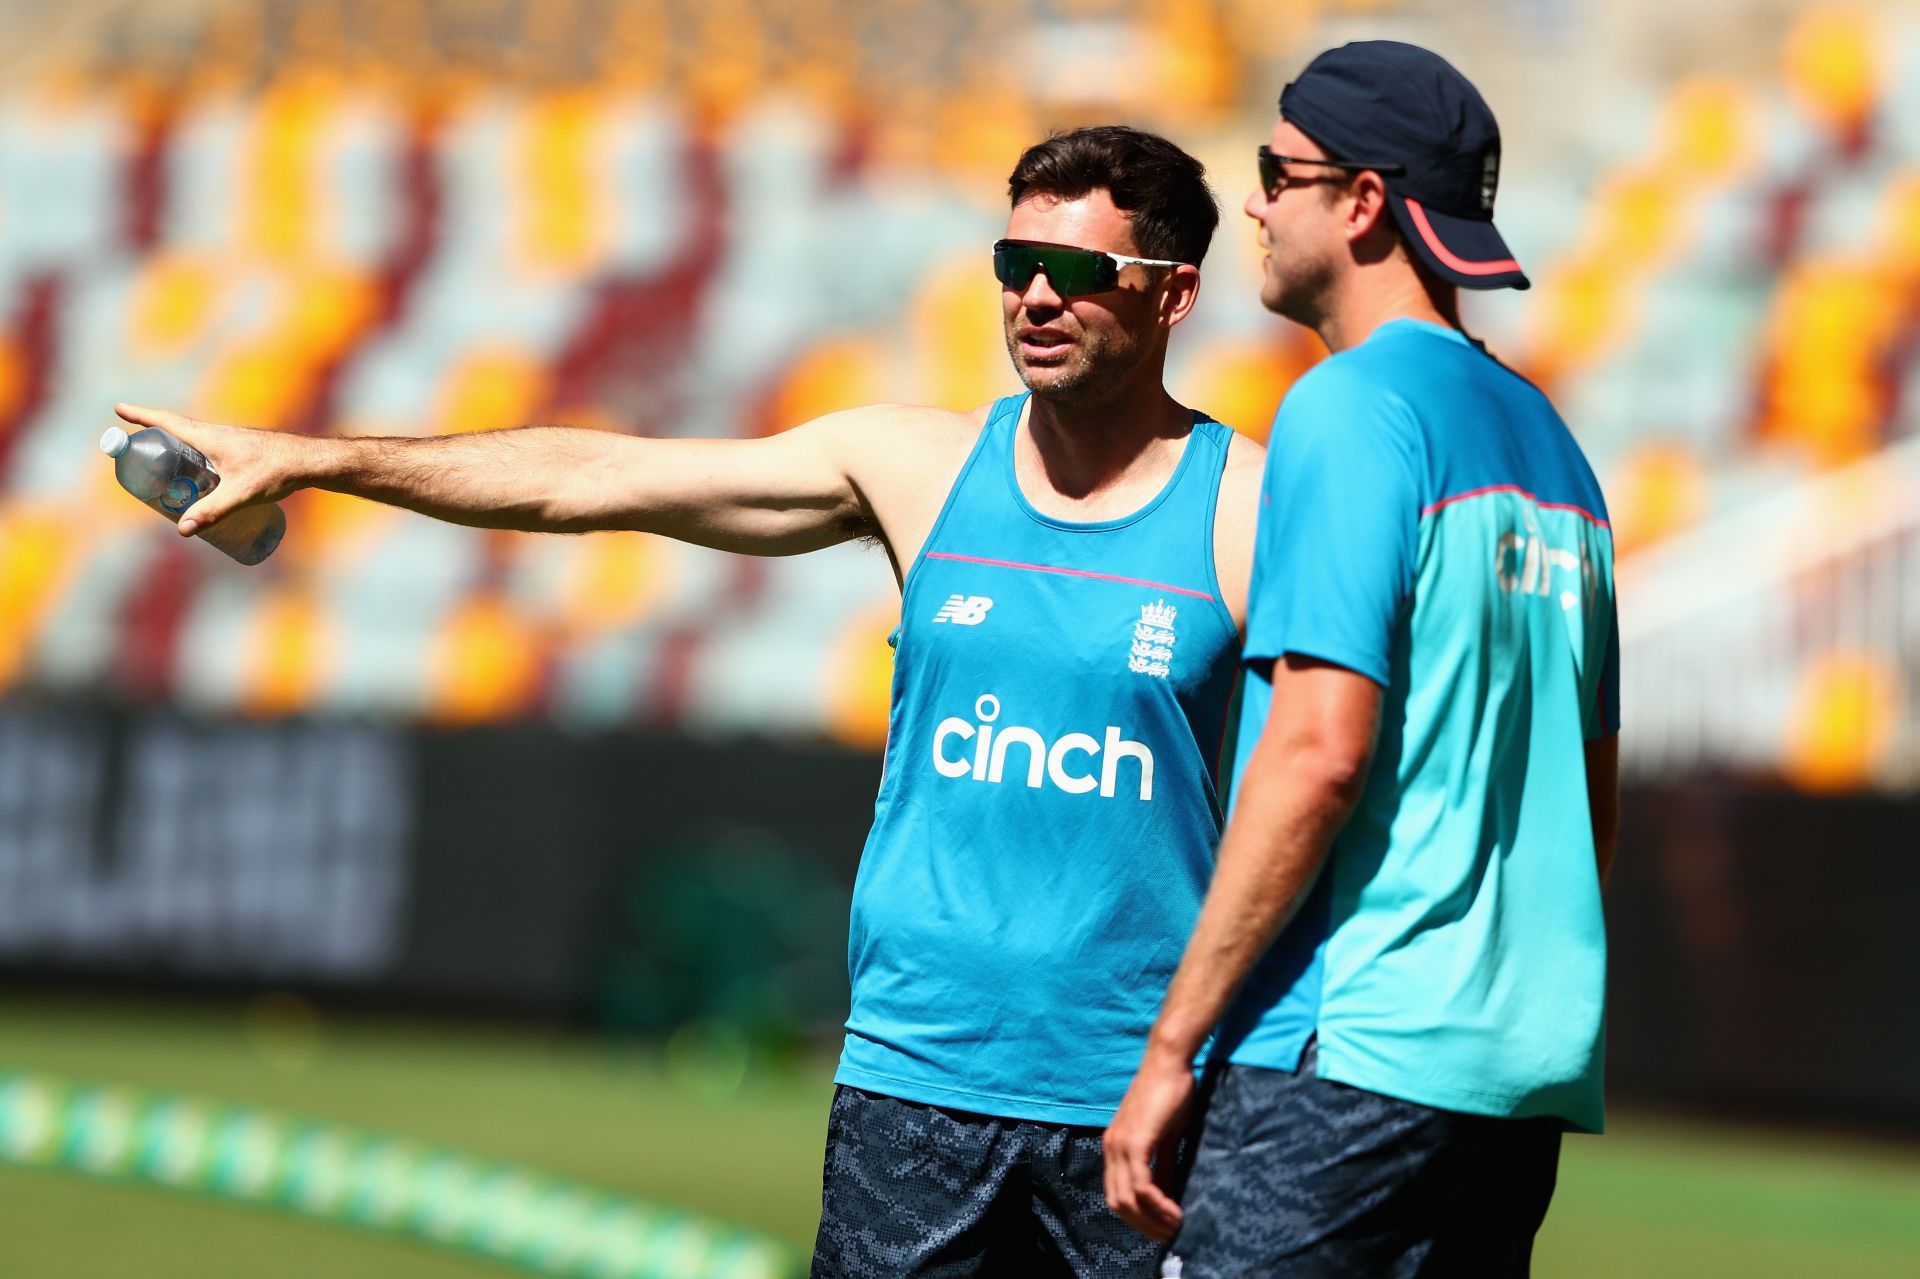 James Anderson (left) and Stuart Broad. (Credits: Getty)